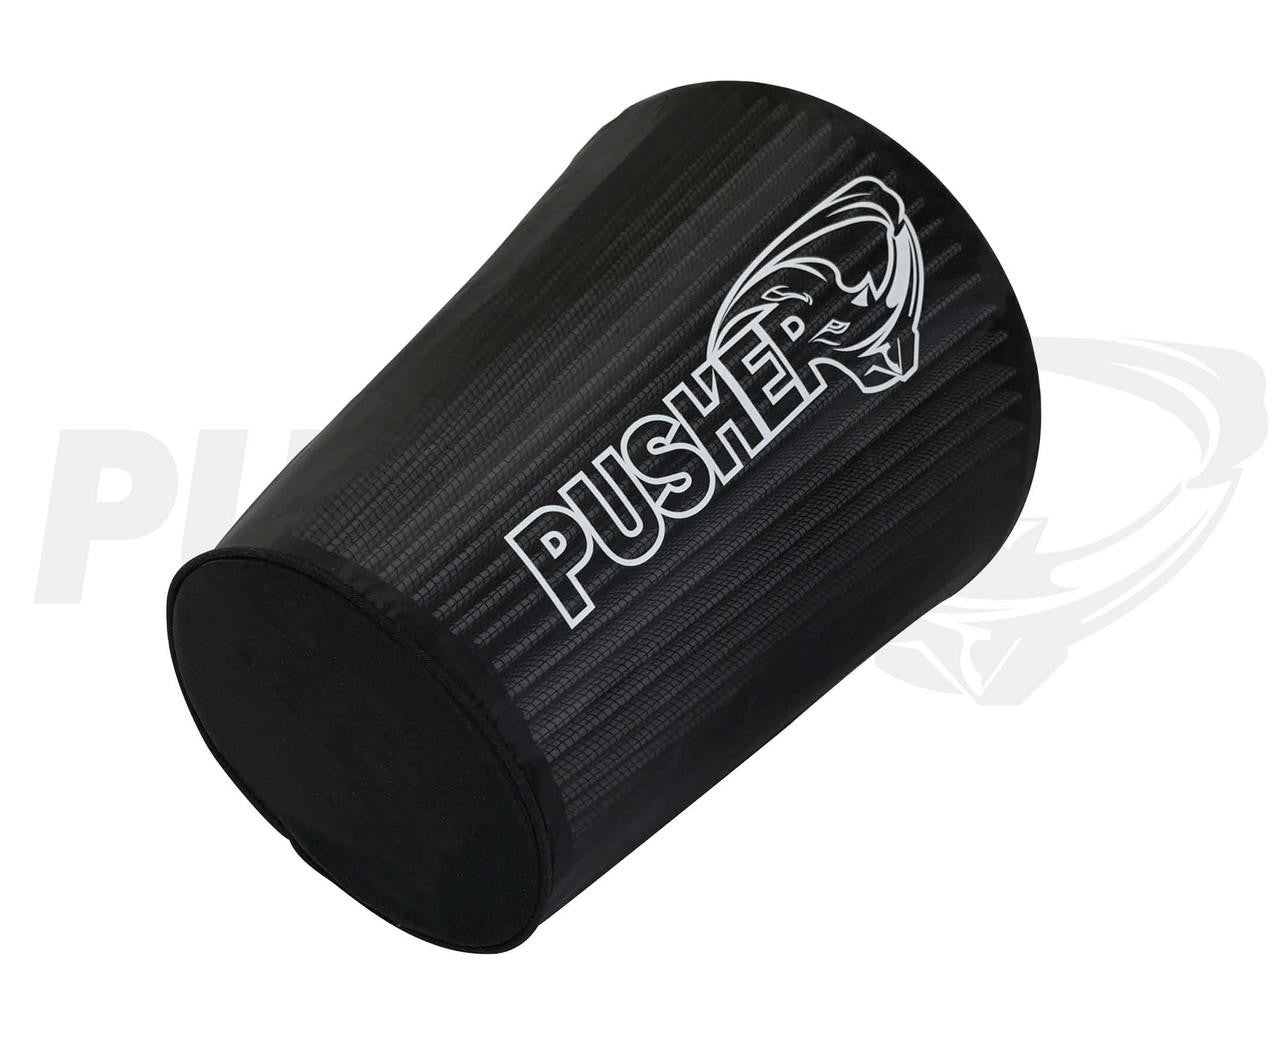 Pusher Intakes Pusher Pre-Filter for Pusher Hollow Point Air Filter 45CAL PPF9-45 